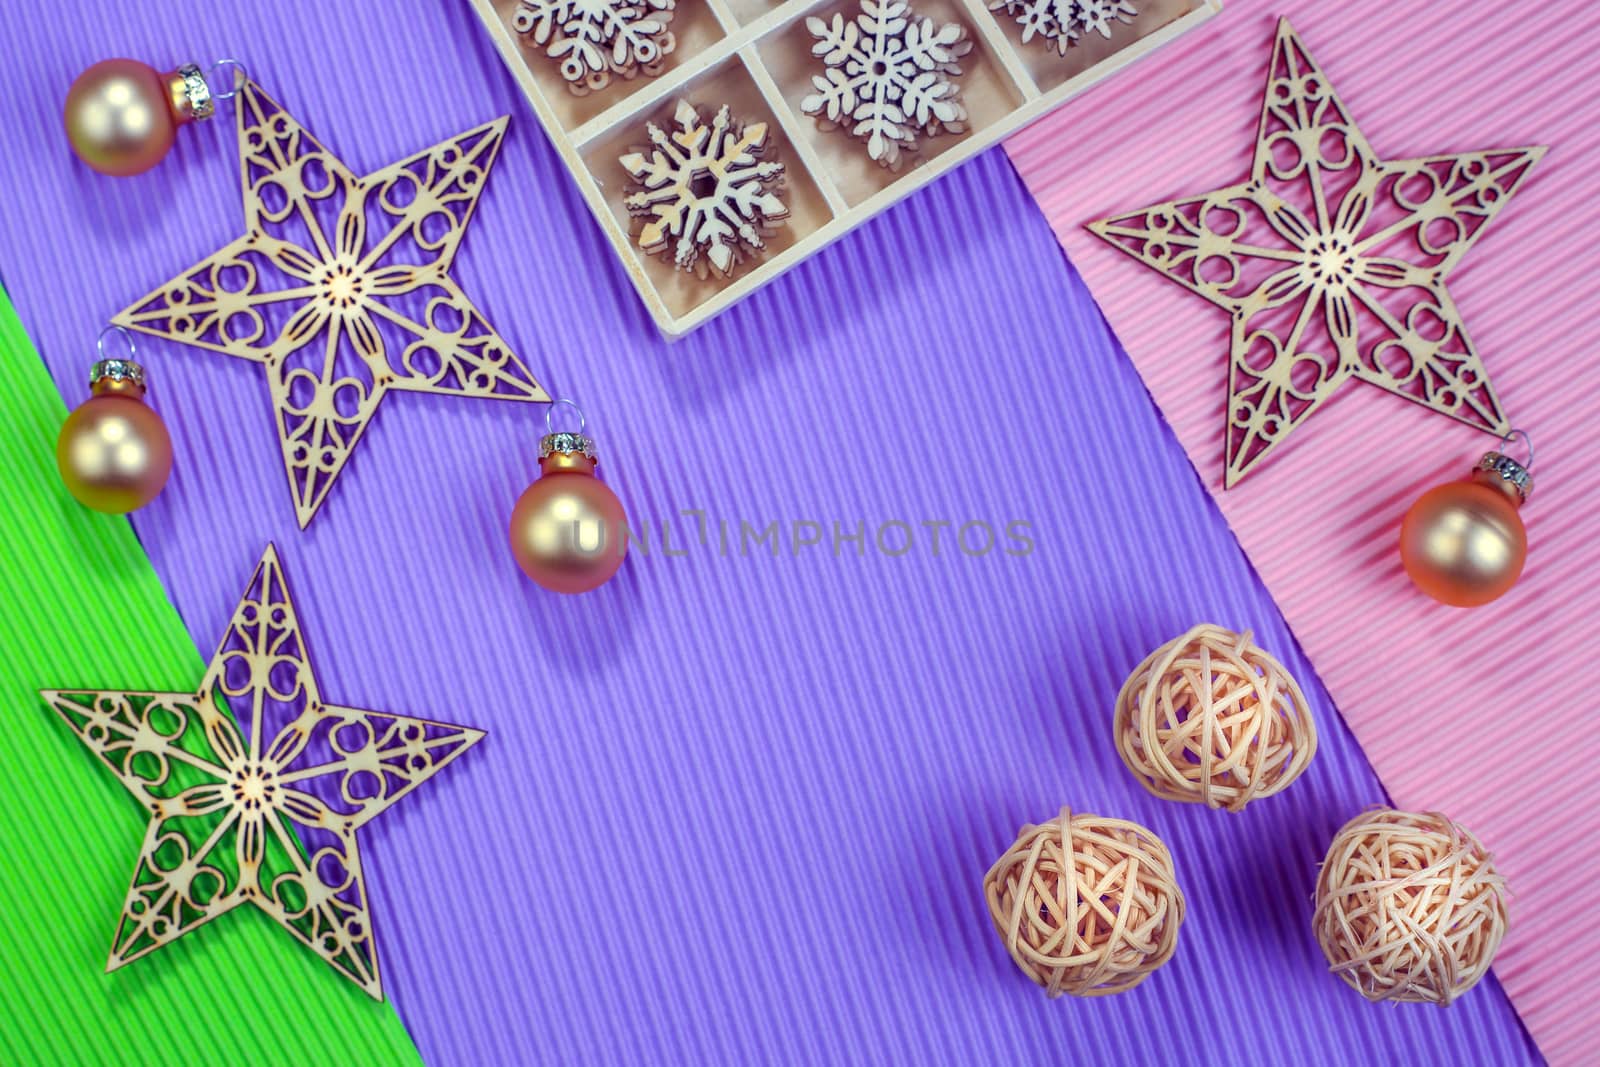 Composition of the Christmas decorations on color paper background. Christmas, winter, New Year concept. Flat lay, top view, copy space.